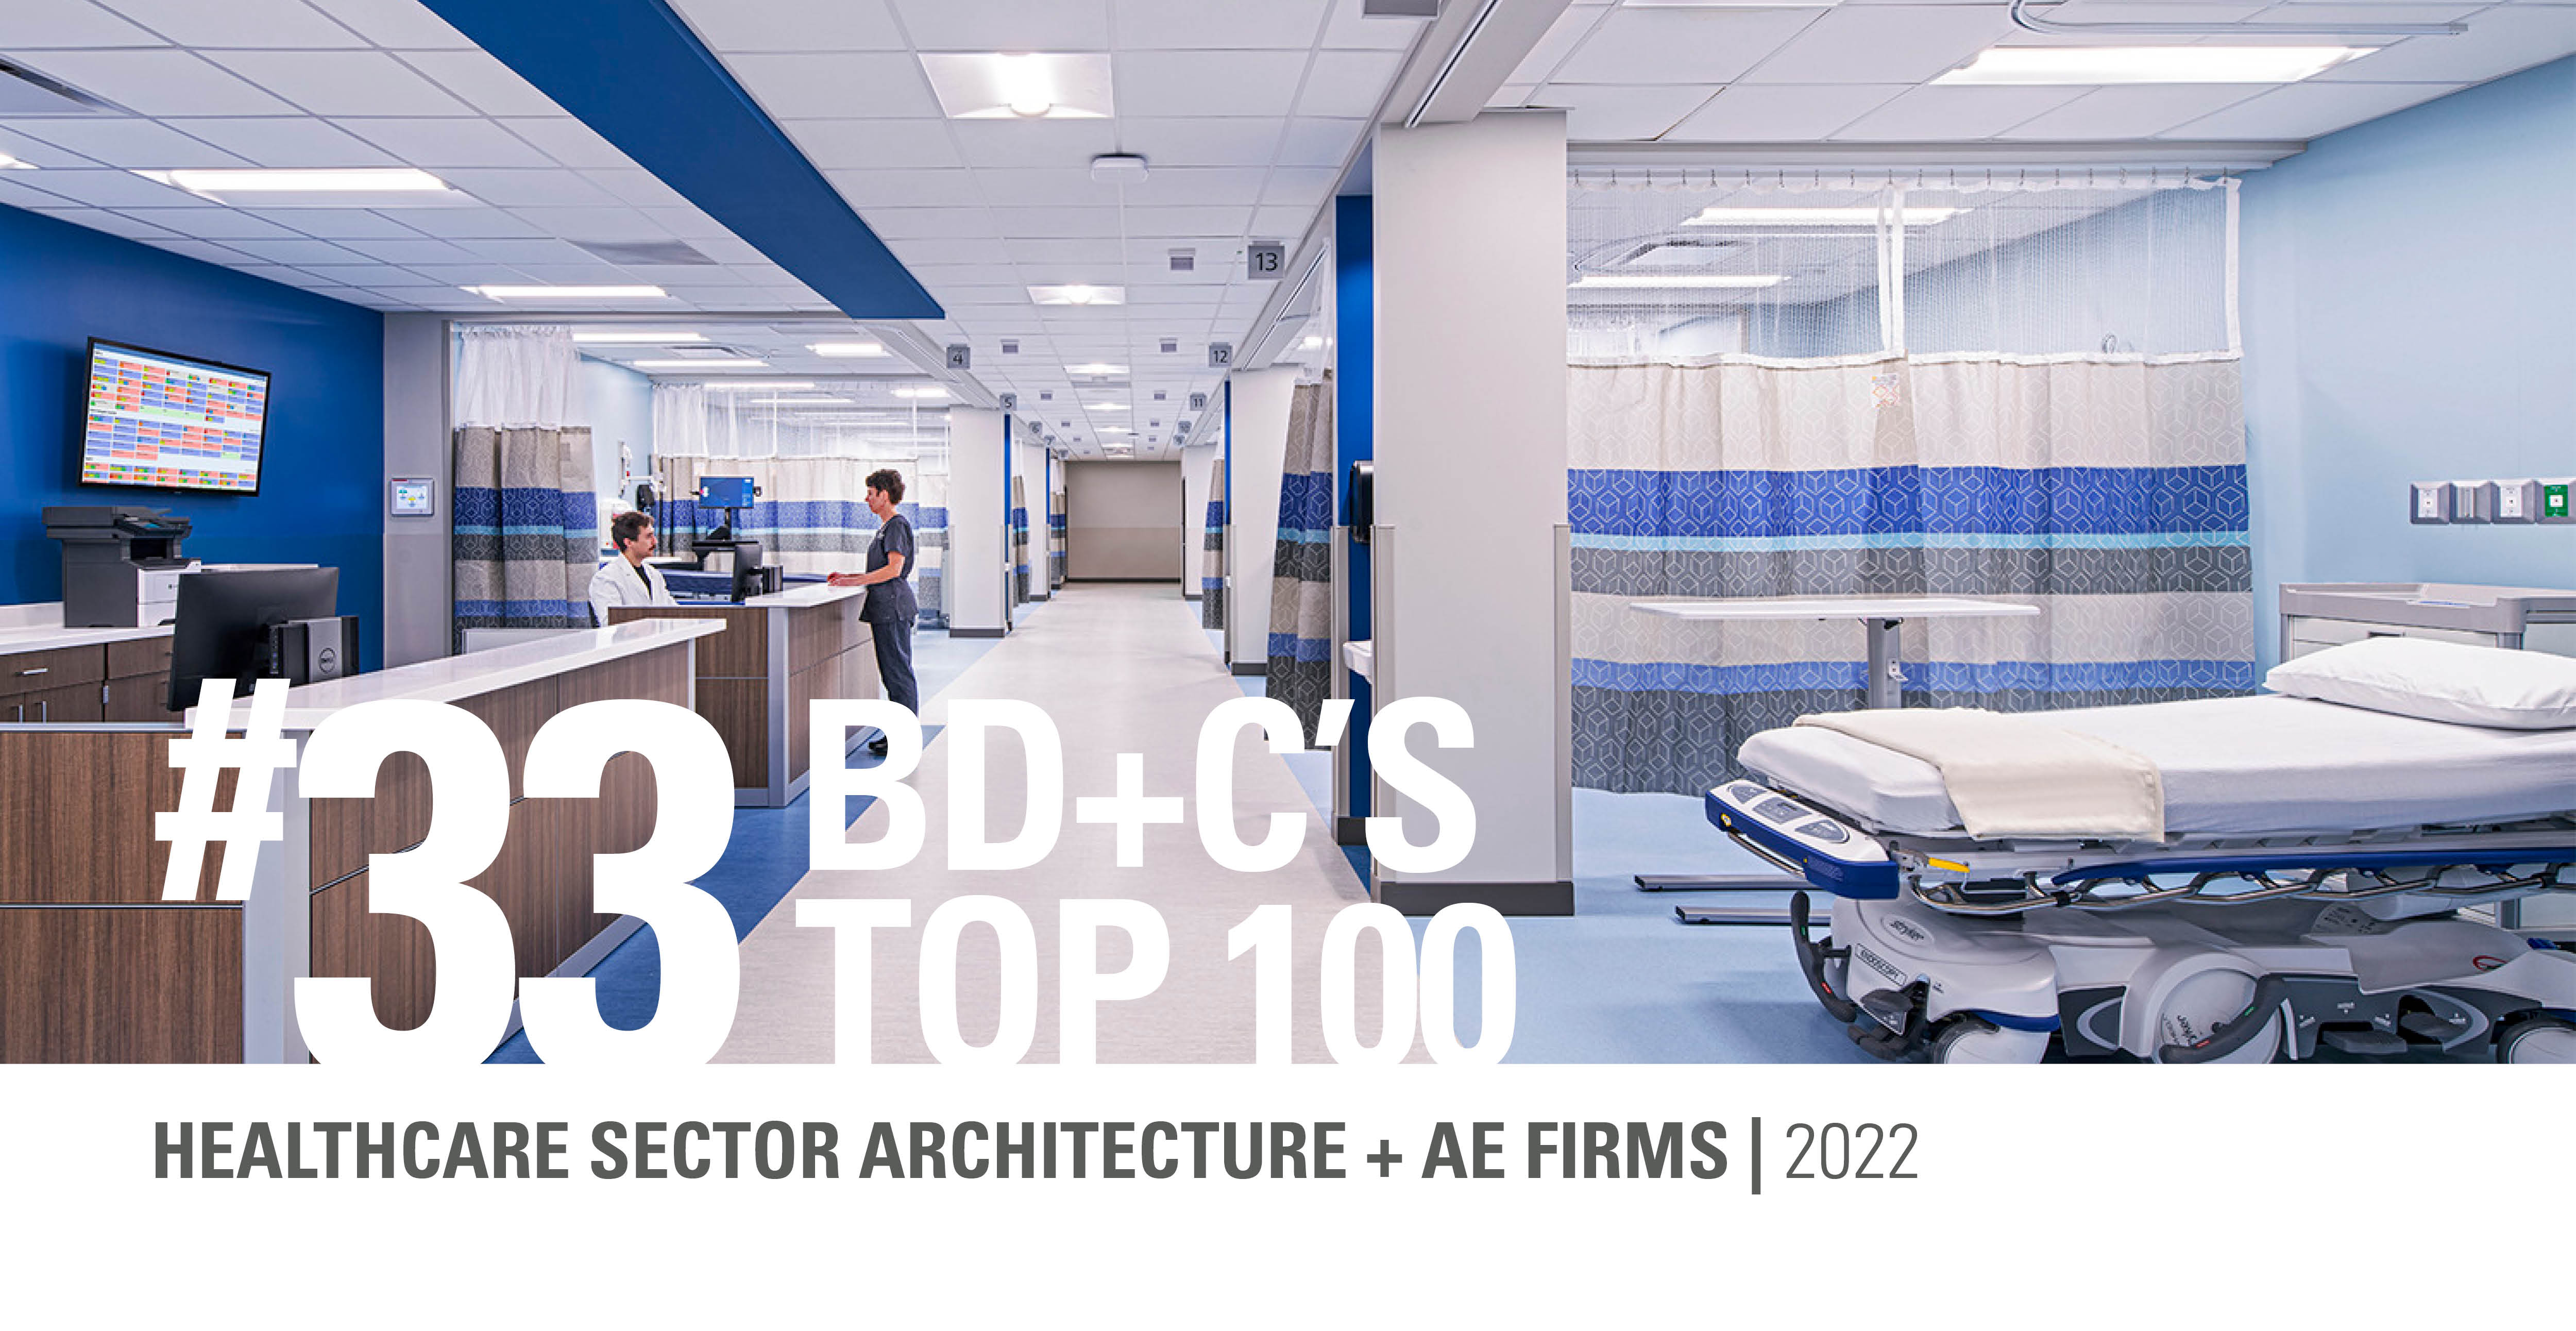 /#33 in BDC's top 170 healthcare architecture firms 2022